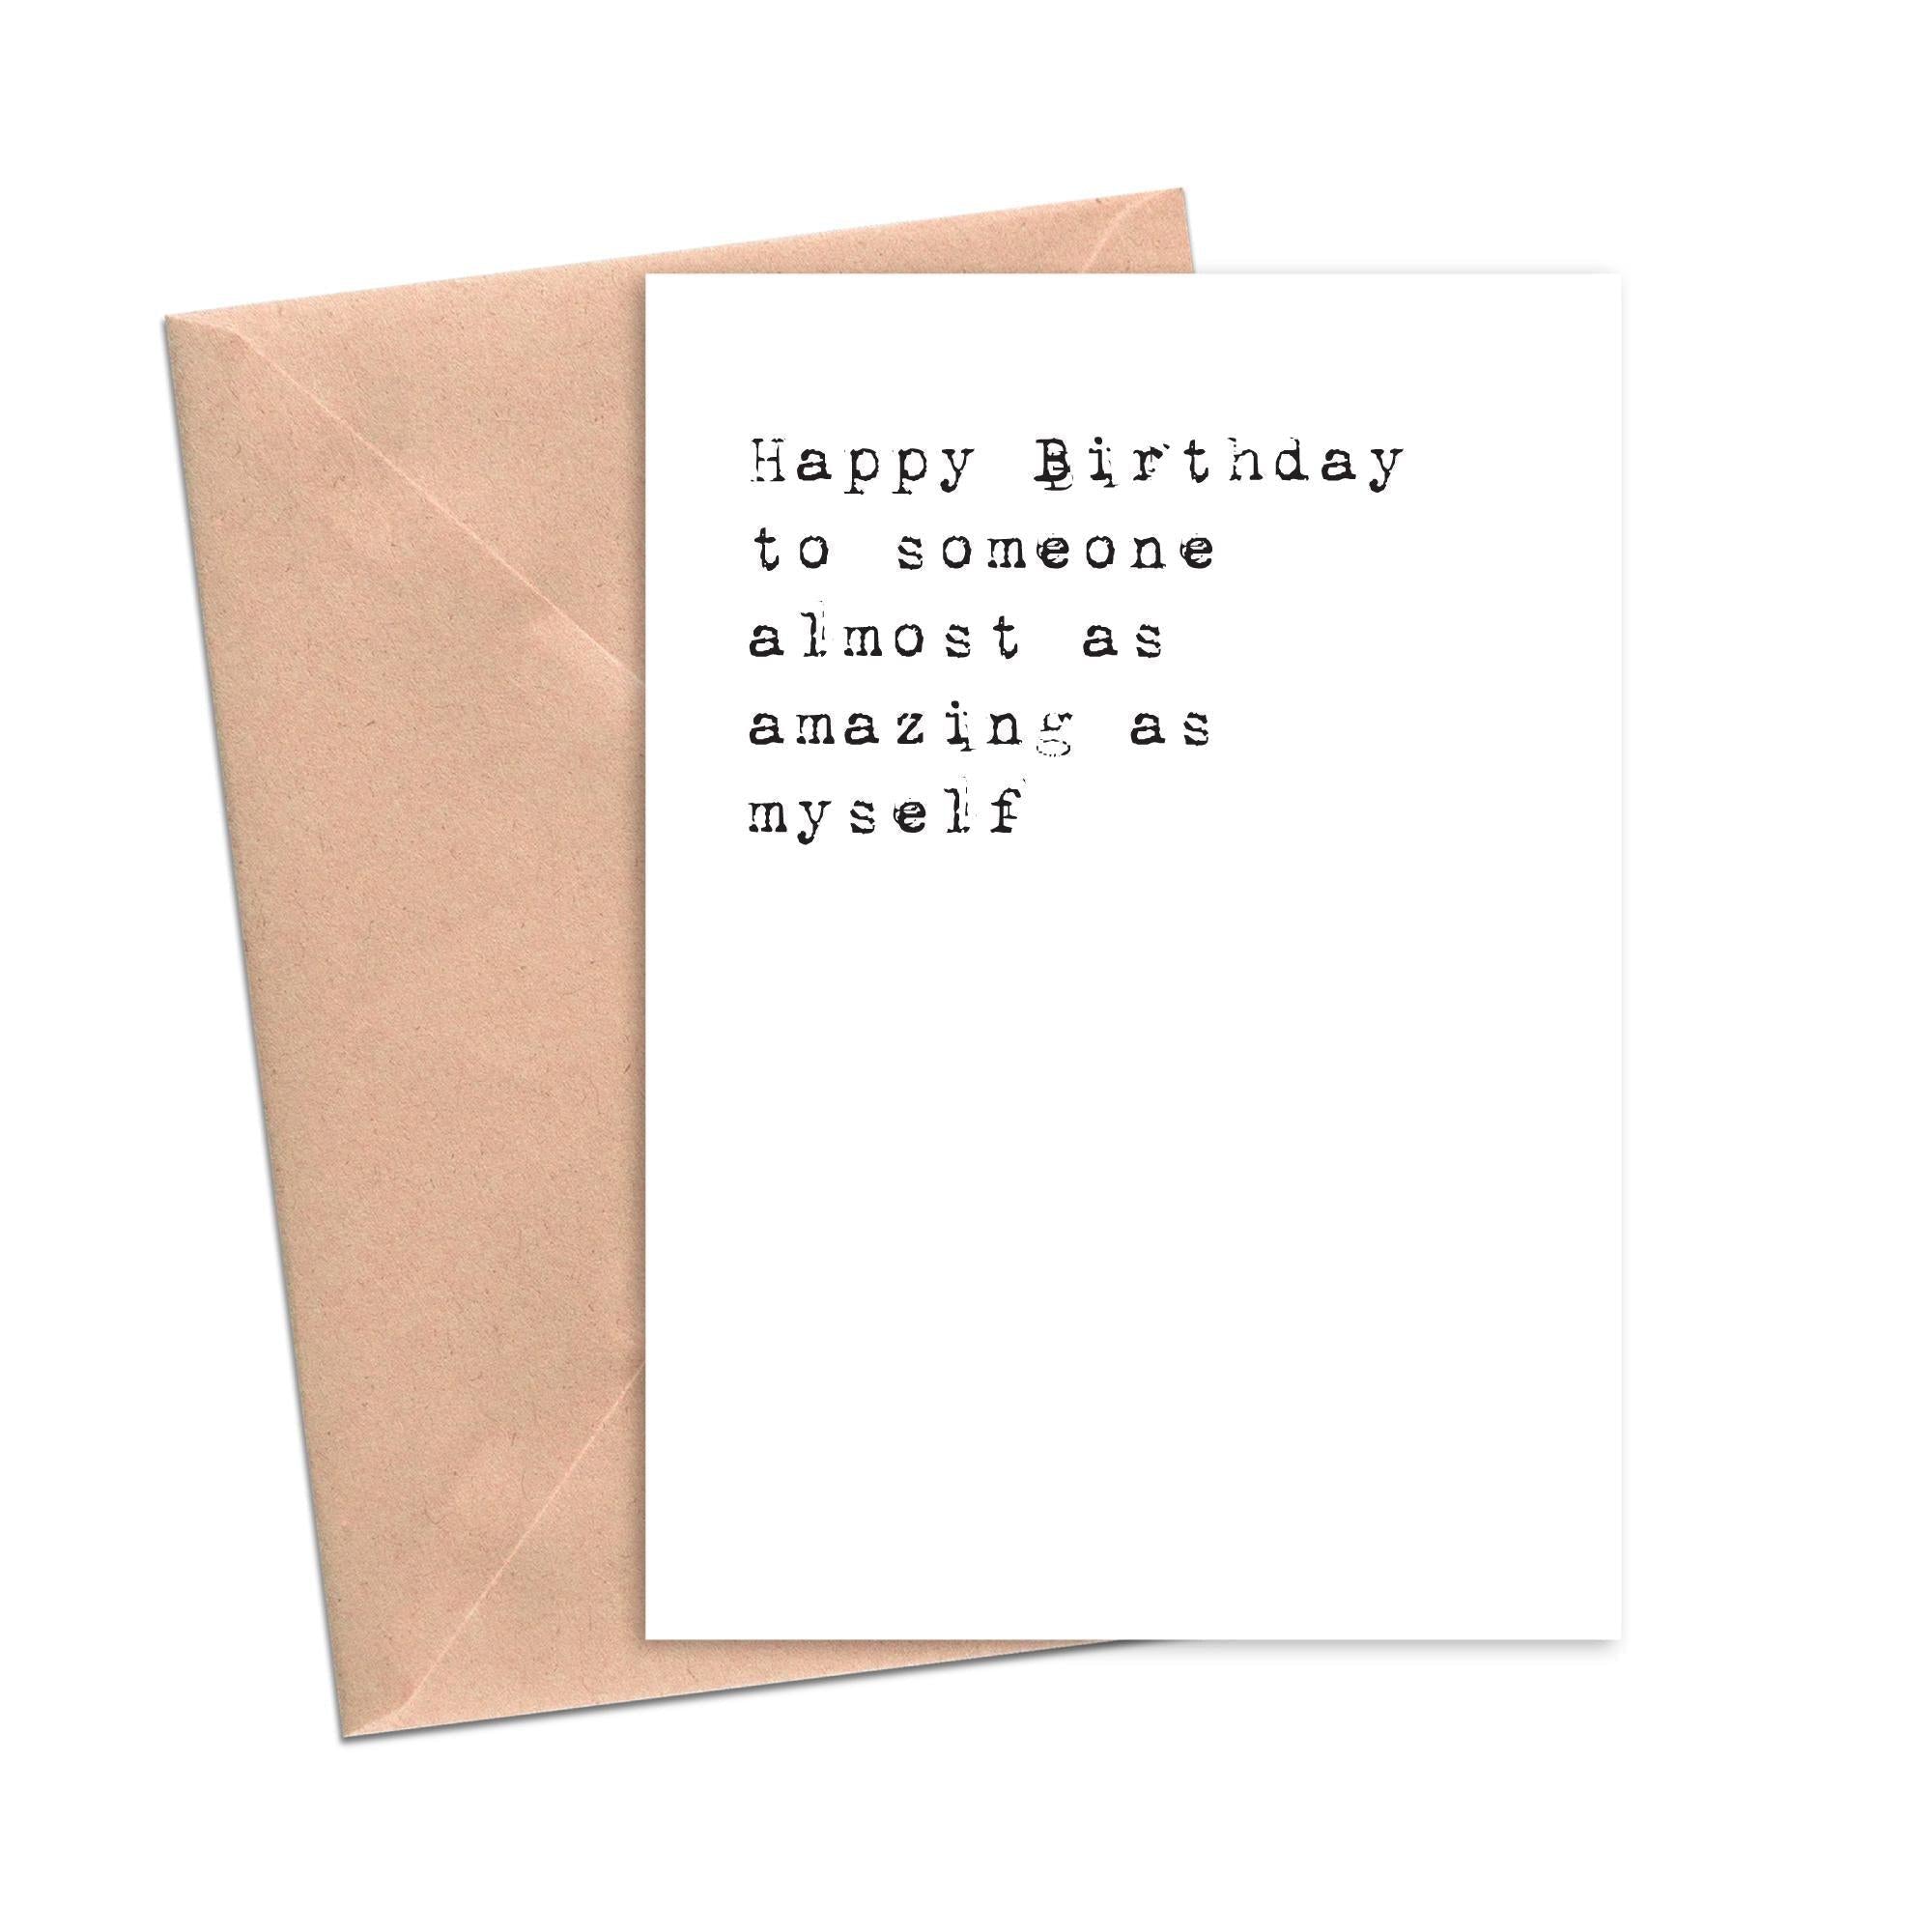 Funny Birthday Card Happy Birthday to Someone Almost as Amazing as